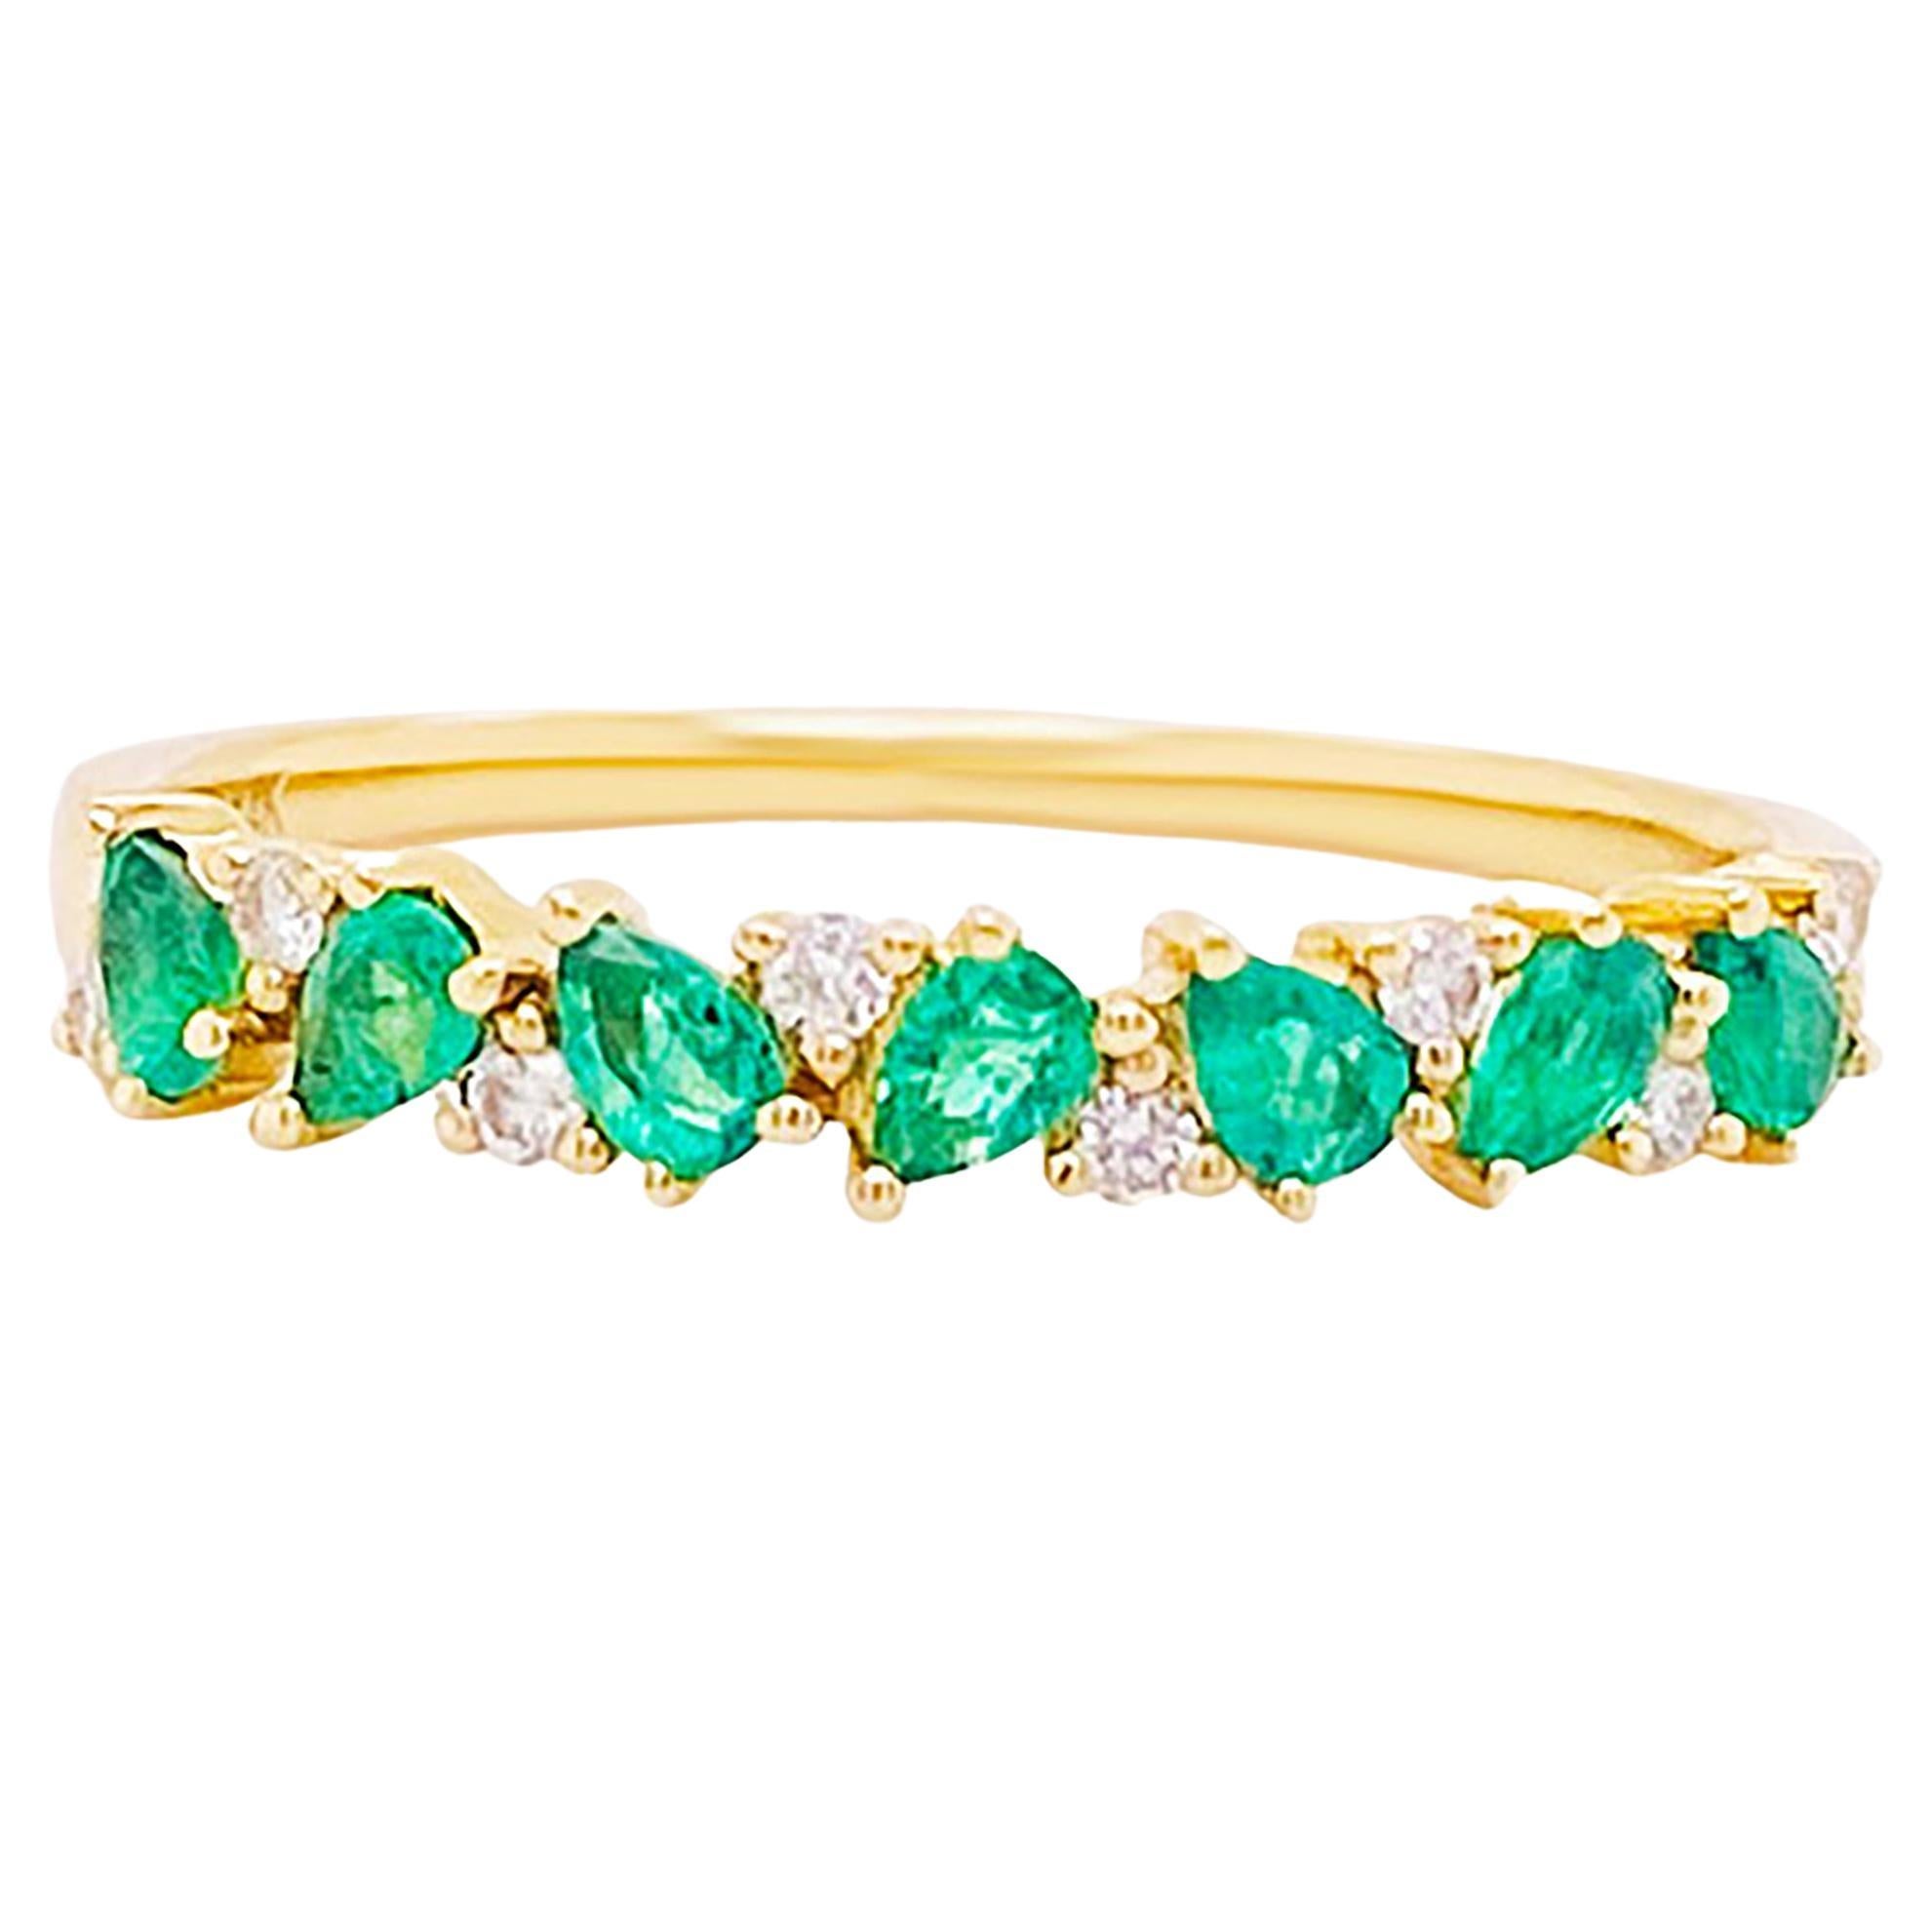 For Sale:  Interesting Emerald Diamond Stackable Band 14K Gold Pear Shape Emerald .50 CT